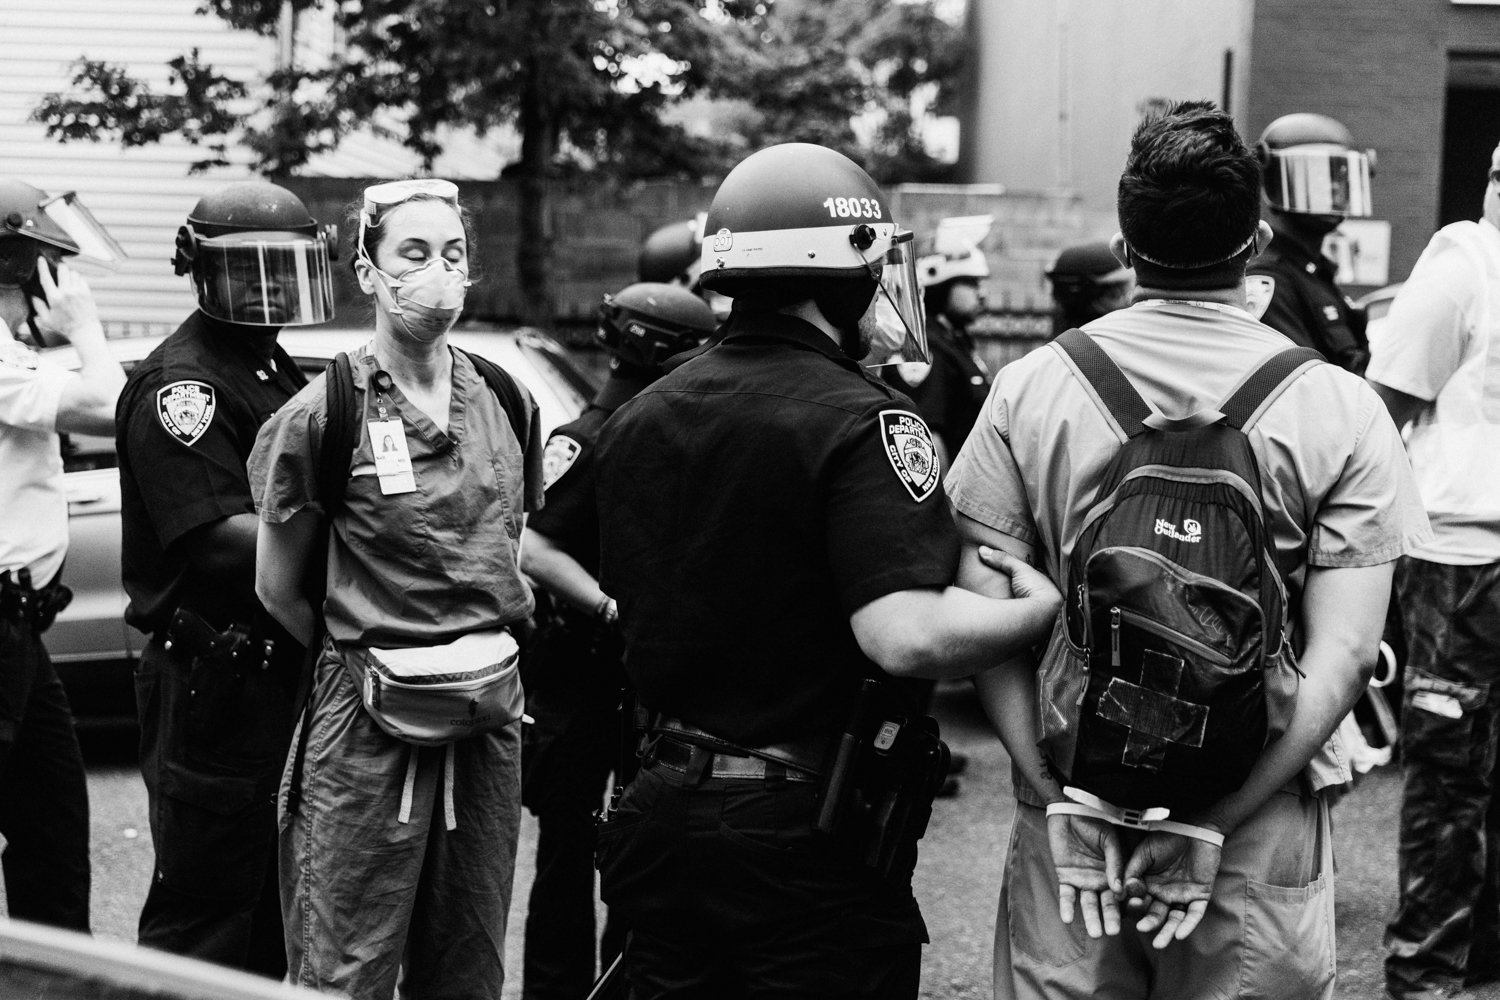 Police arrest medics during a protest in Mott Haven on June 4. The protesters were surrounded by police in what is known as a kettle. Nearly 100 were arrested.